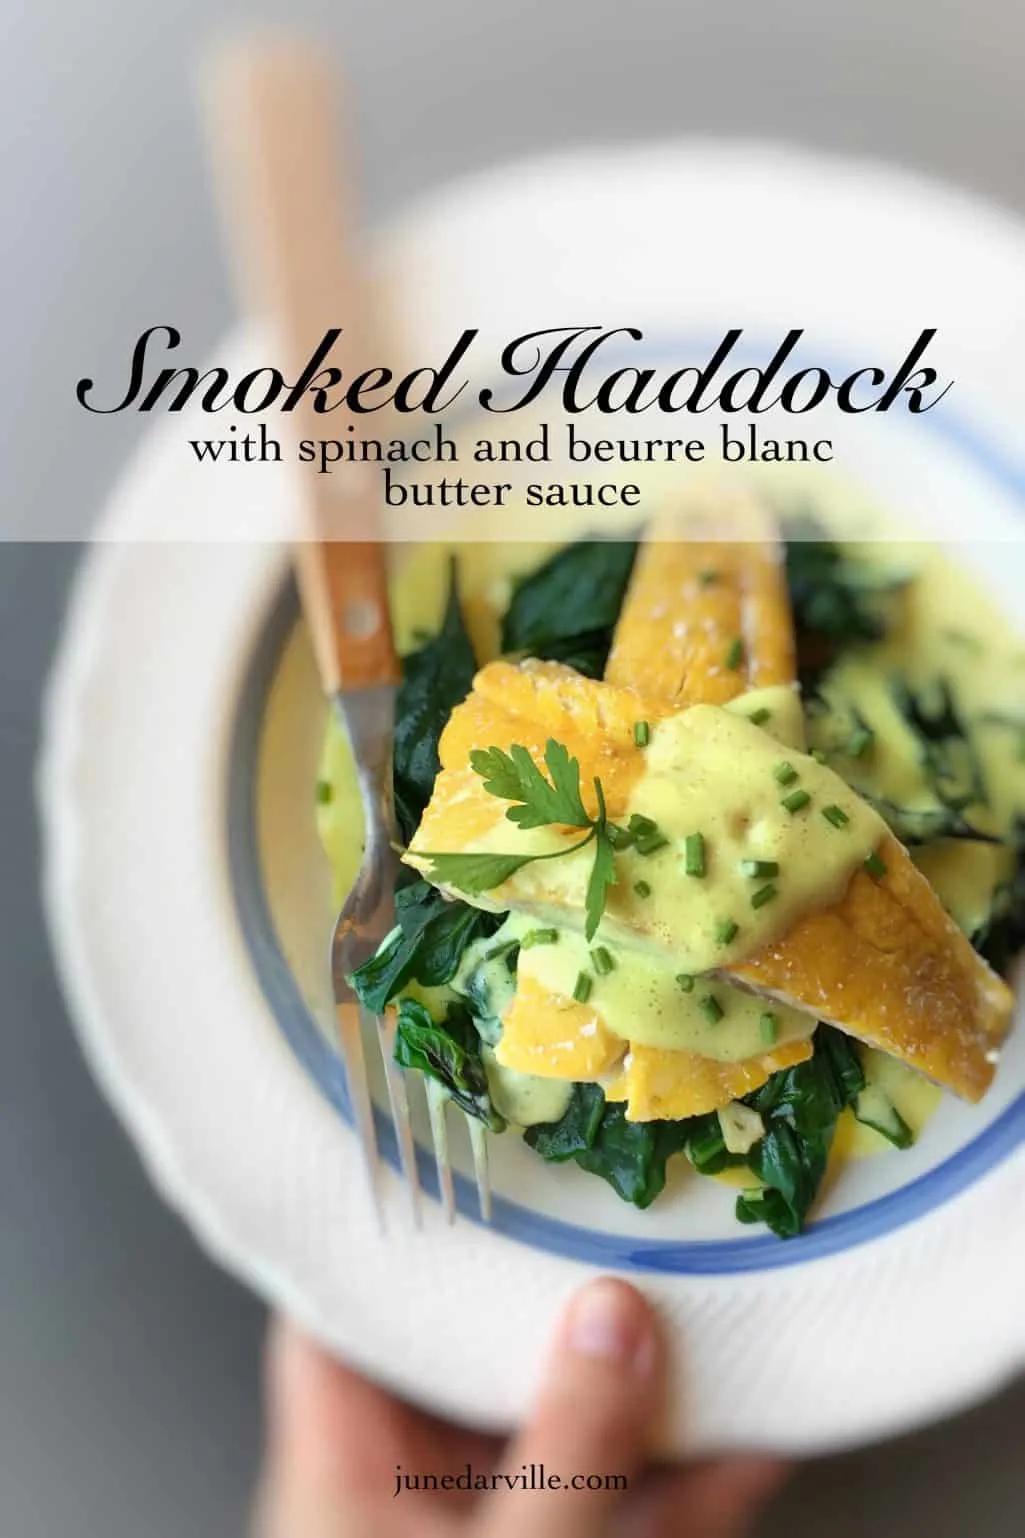 smoked cod and spinach recipe - Why is smoked cod yellow